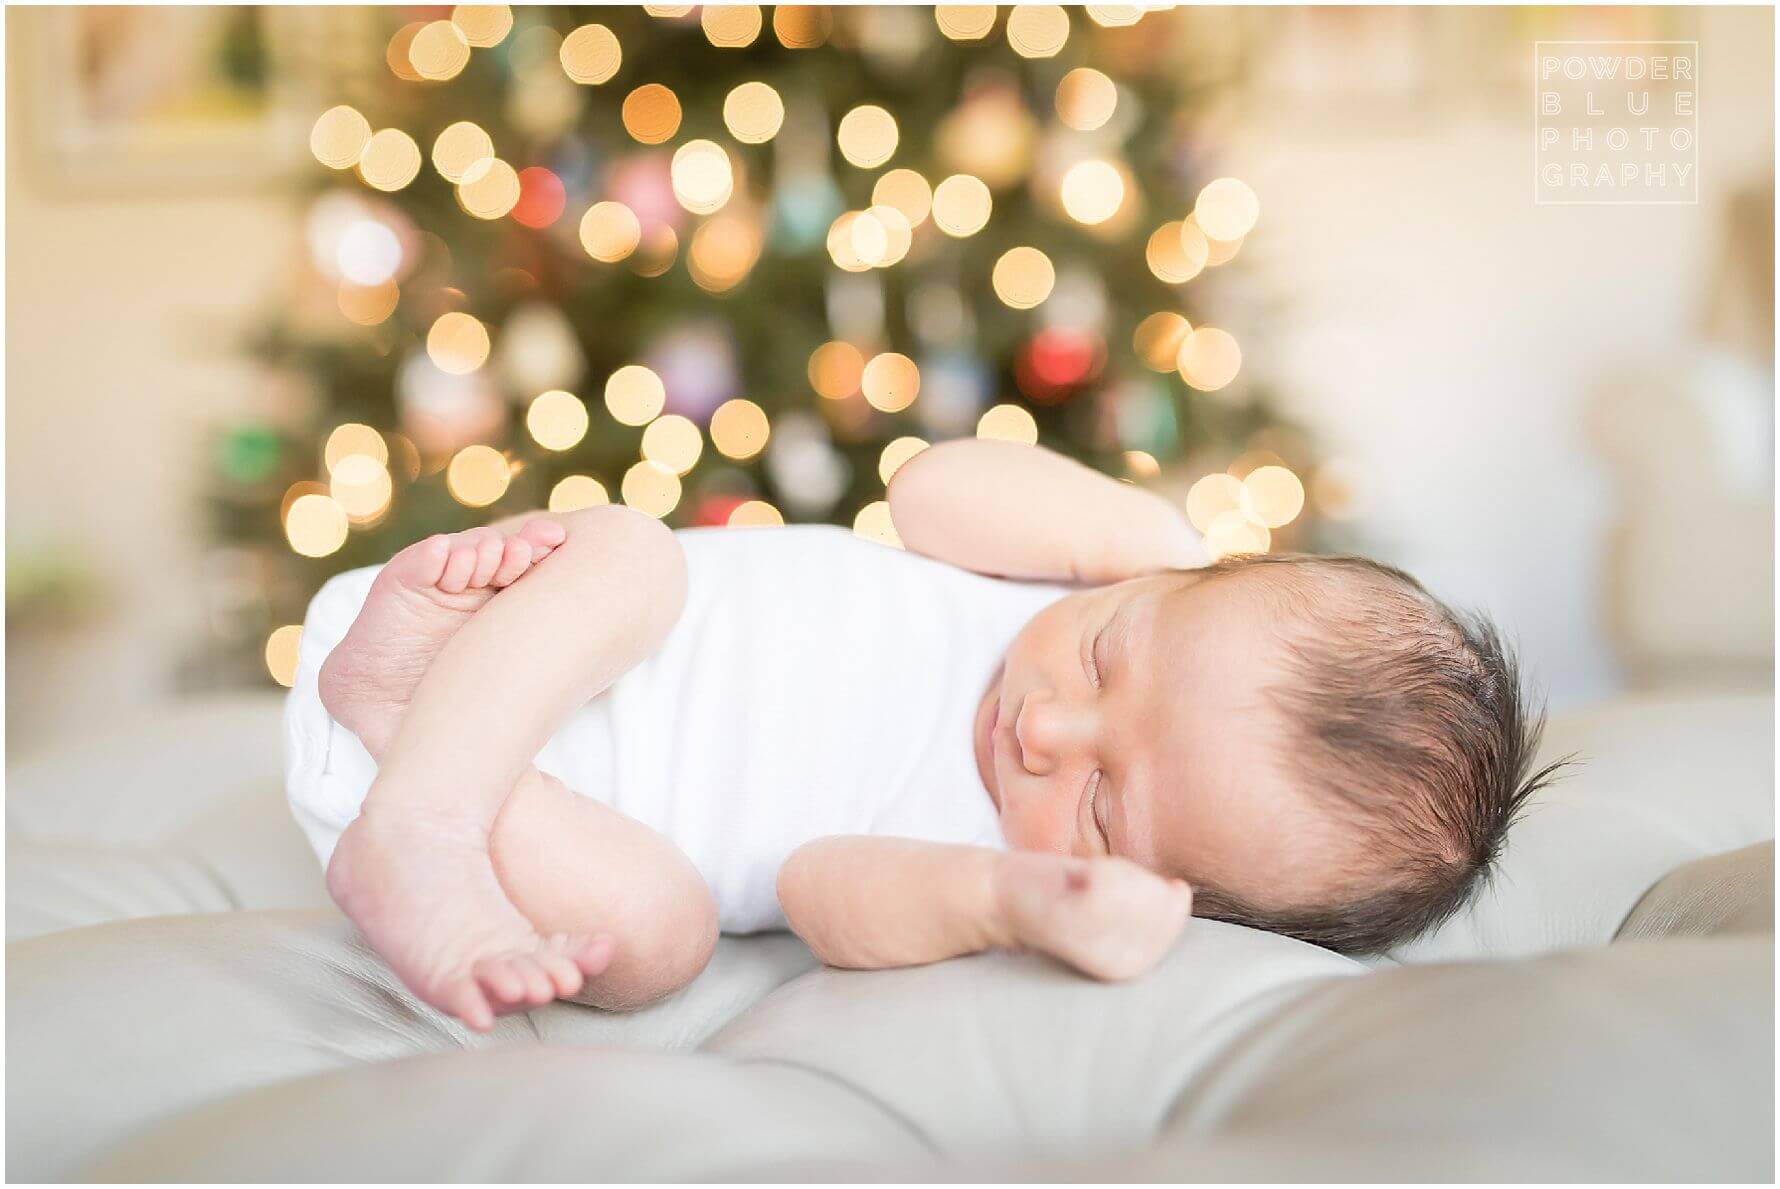 pittsburgh newborn photographer missy timko photographed this baby iboy in front of the christmas tree with twinkling lights behind him. wide open aperture with christmas tree as backdrop.